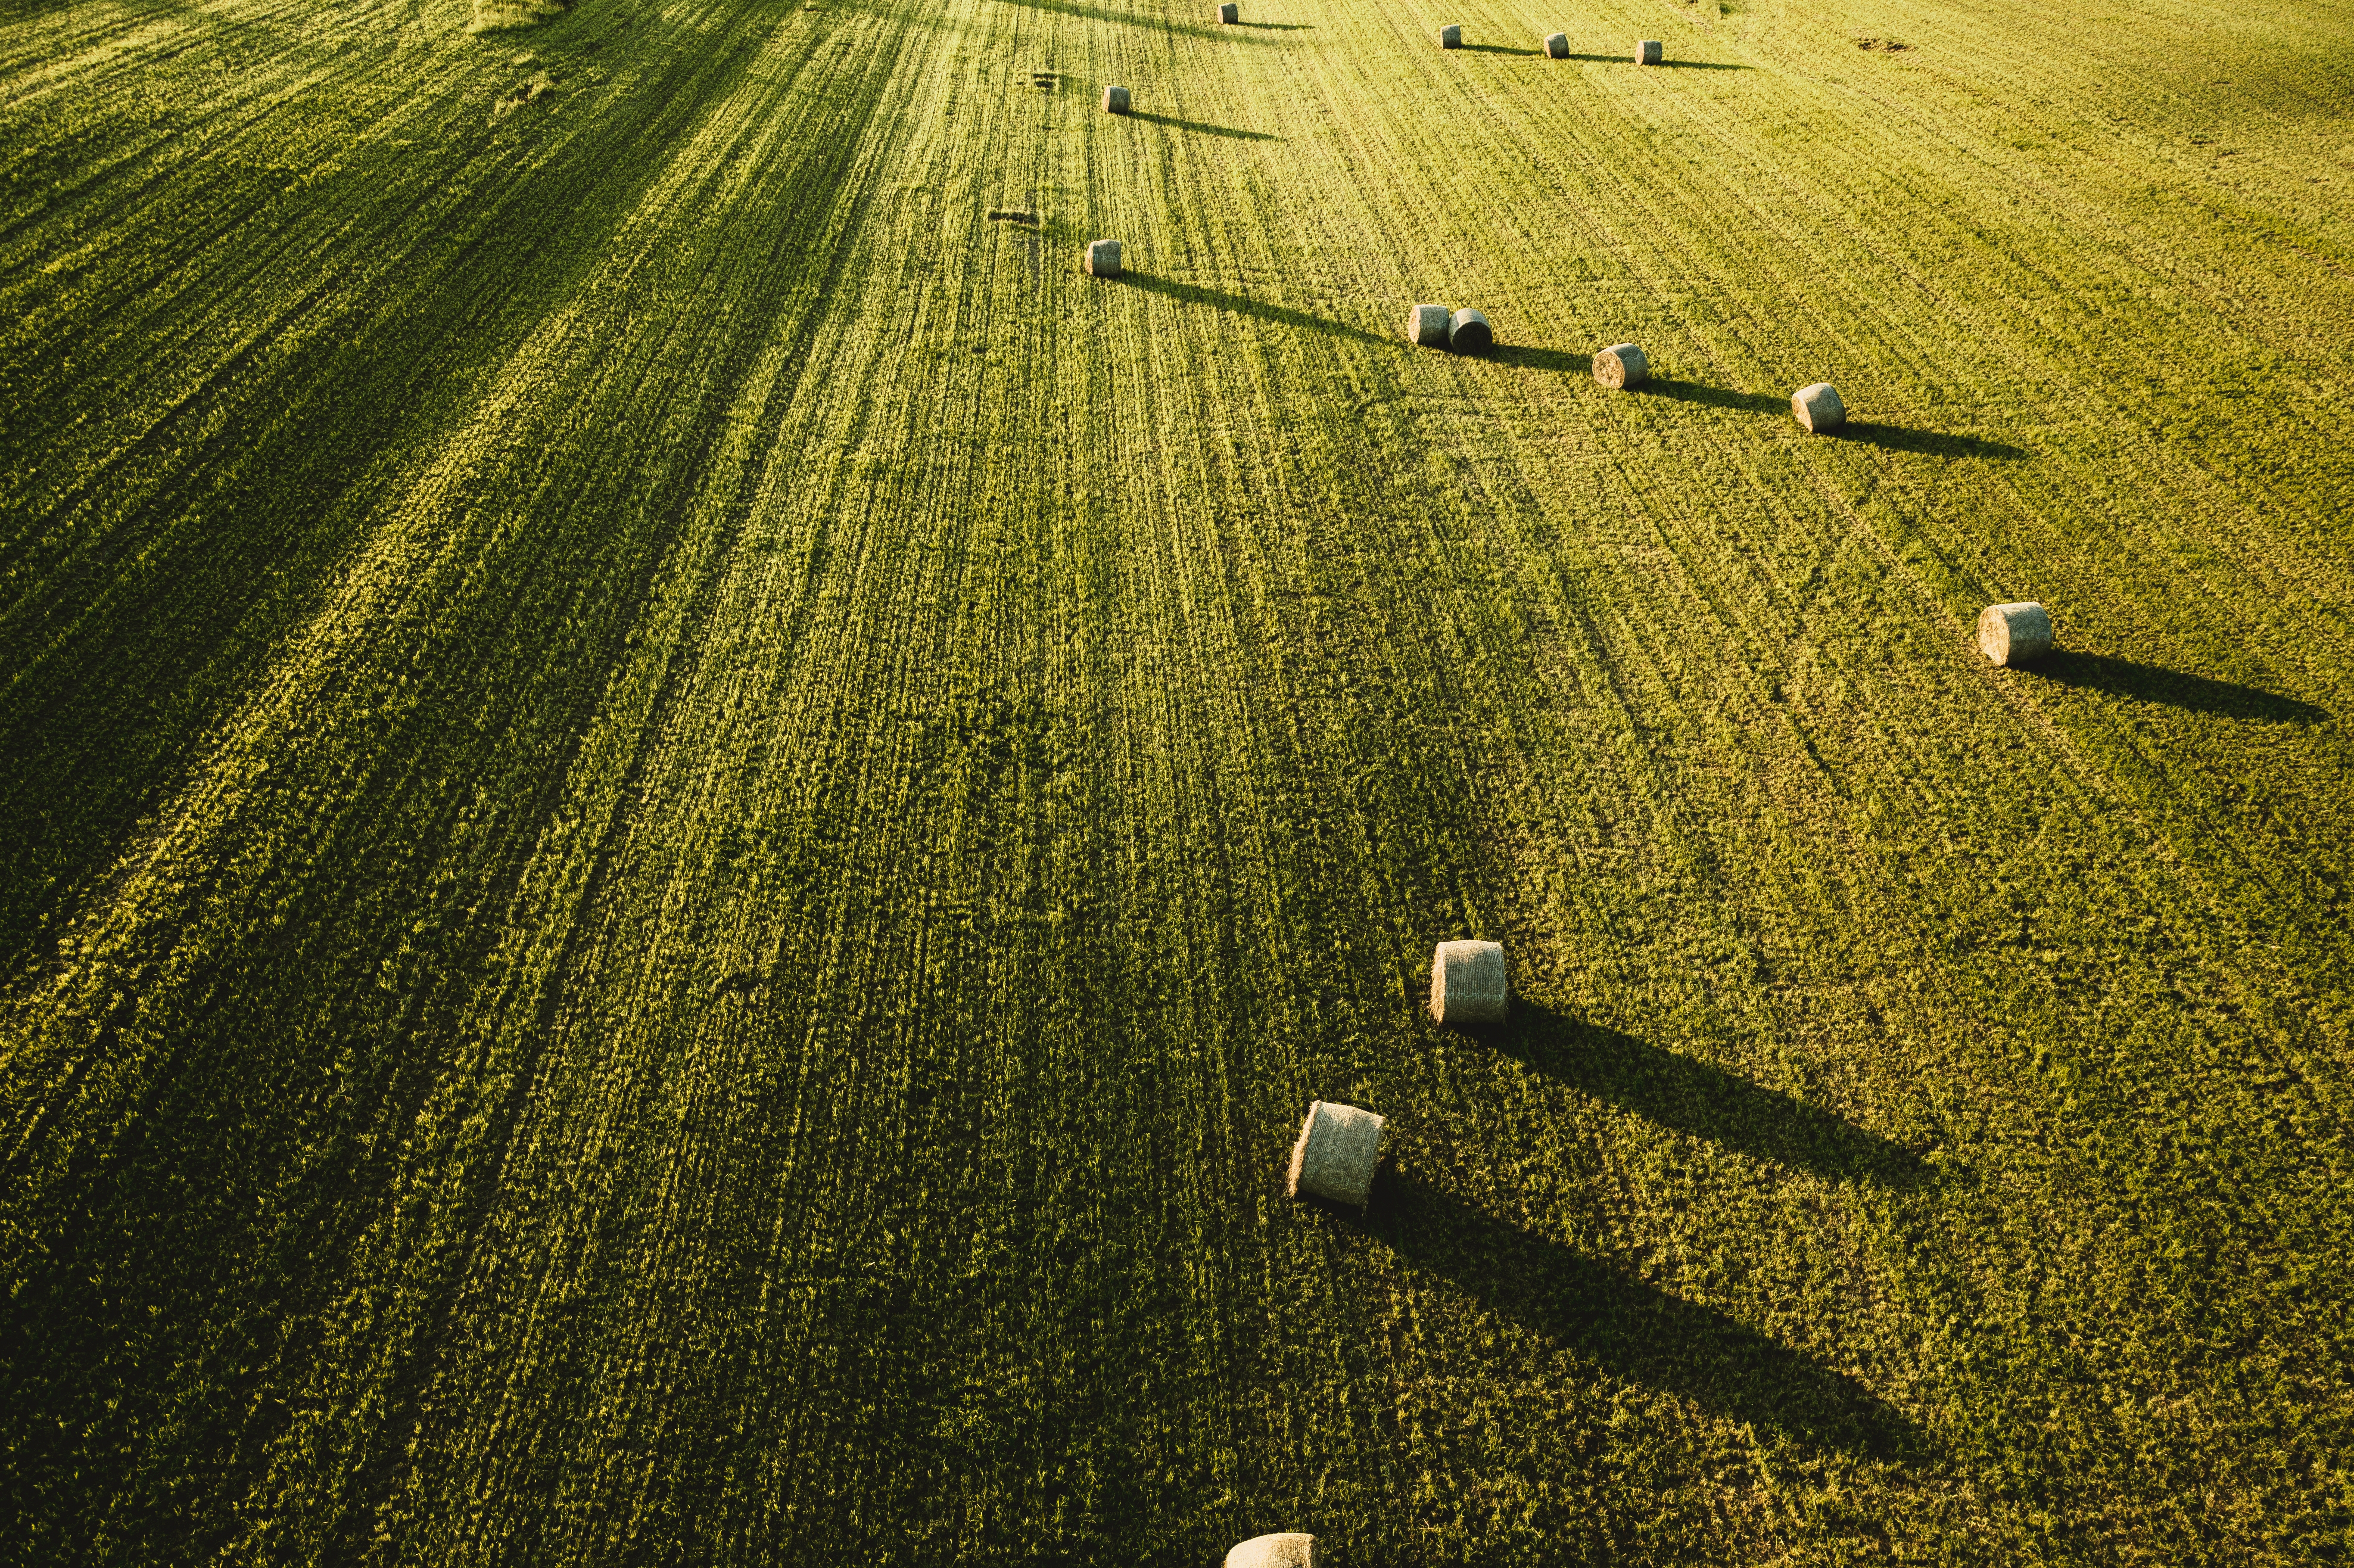 large-beautiful-agricultural-field-with-stacks-hay-shot-from.jpg